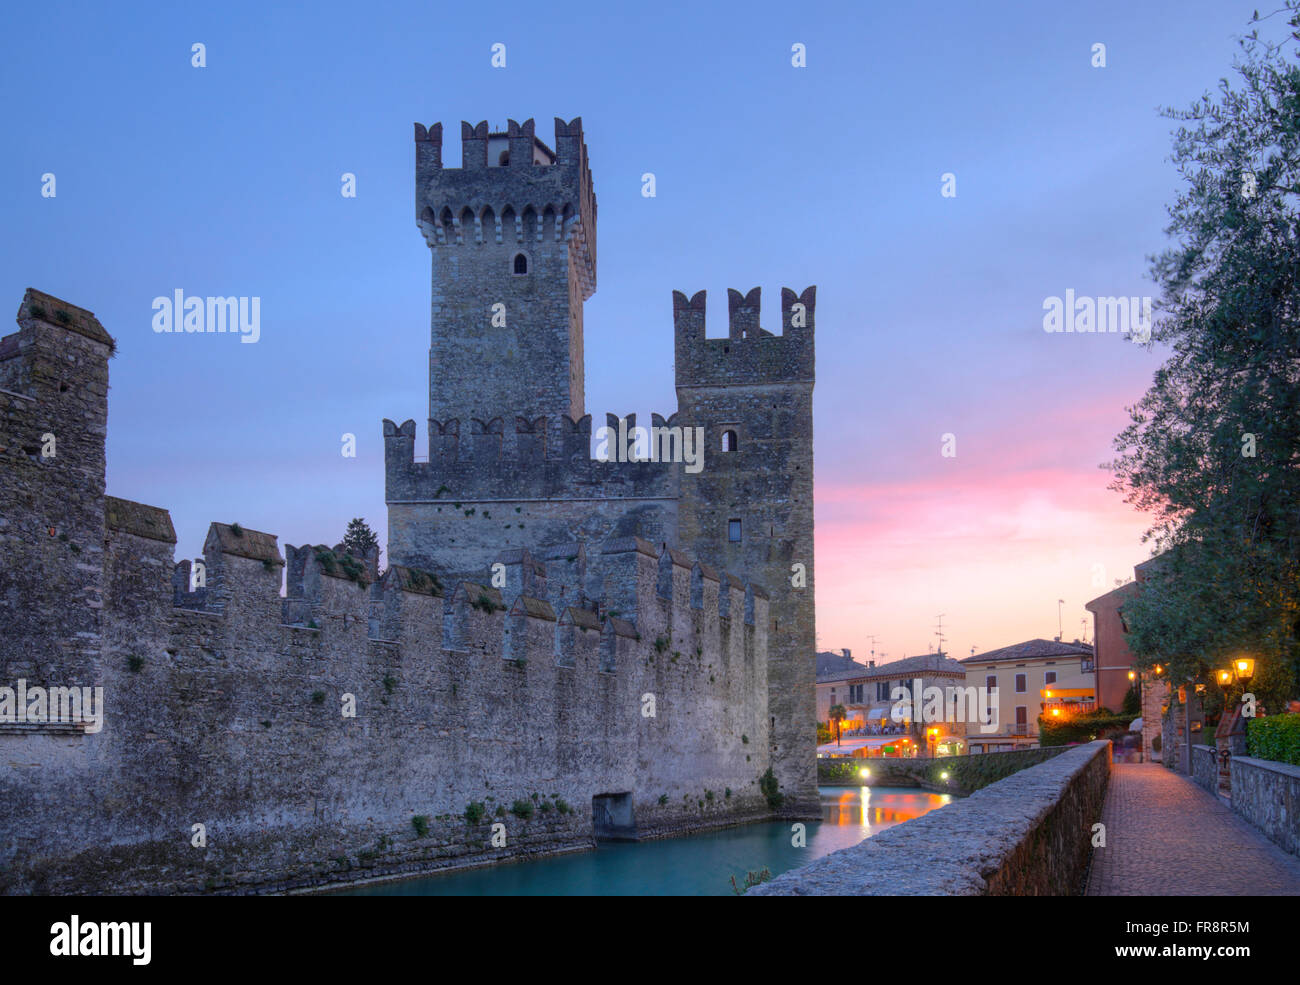 The scaliger castle of Sirmione, Italy Stock Photo